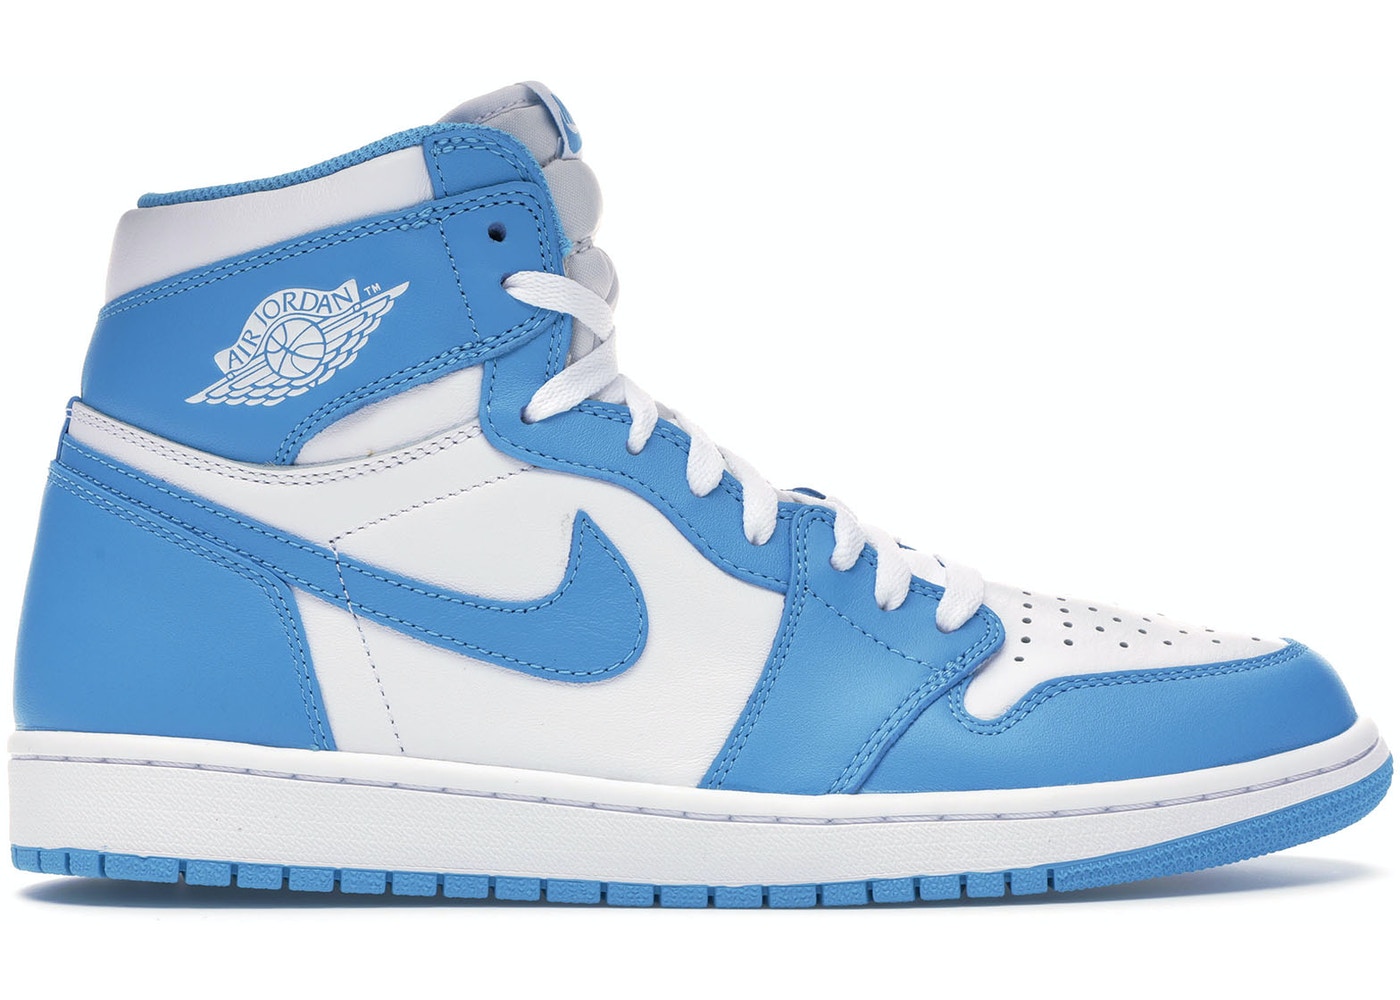 The Best Air Jordan 1s Of All Time